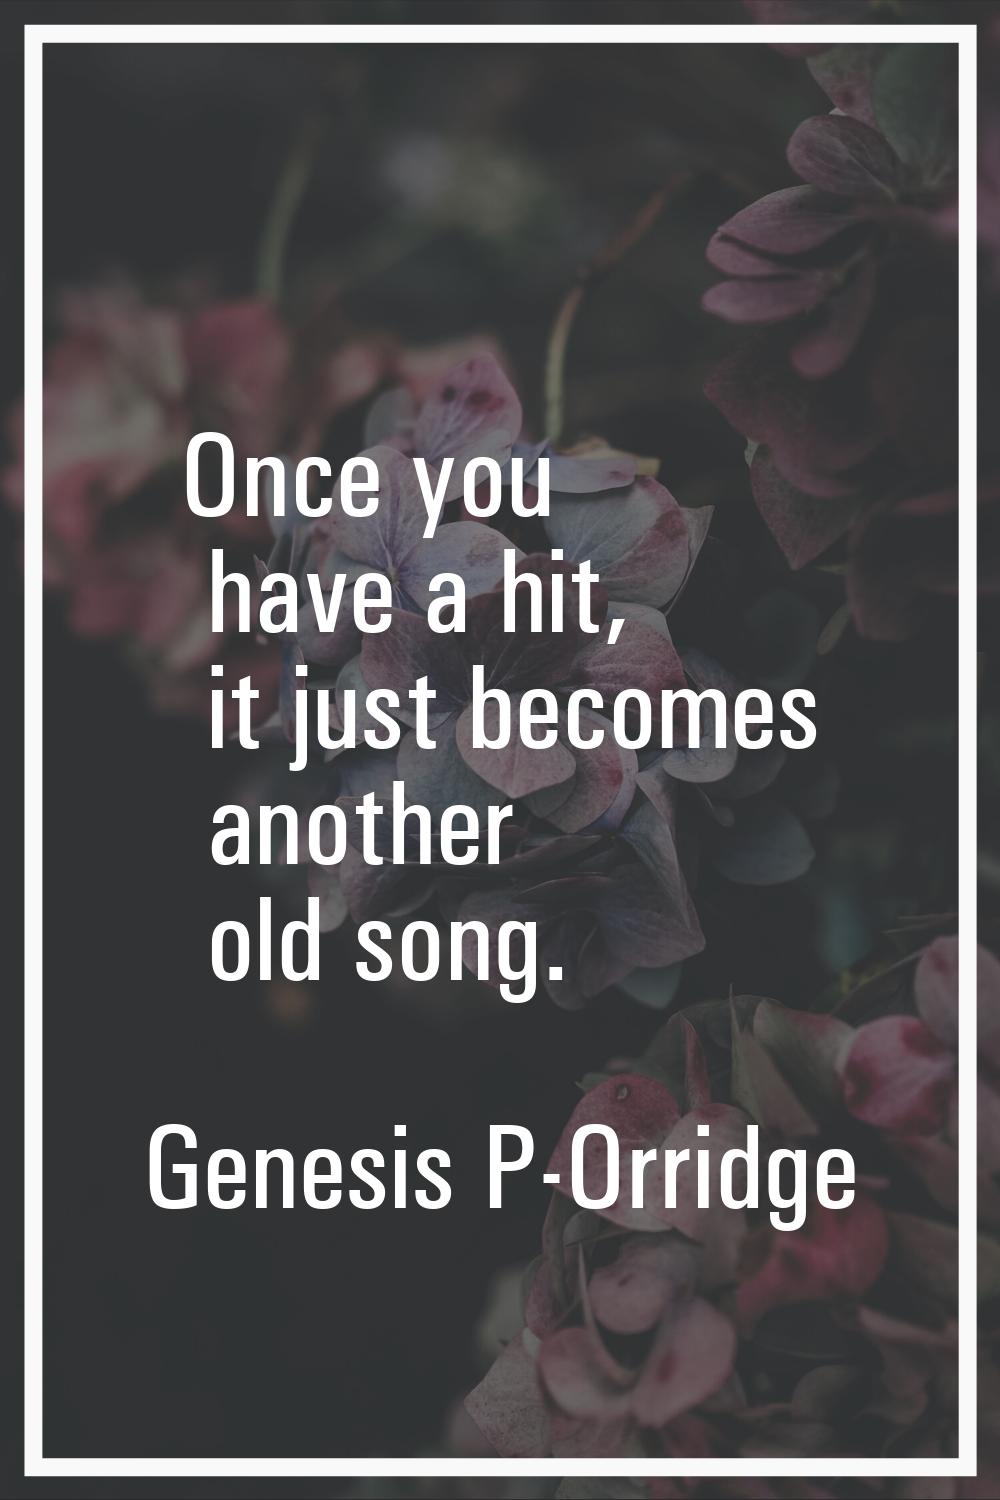 Once you have a hit, it just becomes another old song.